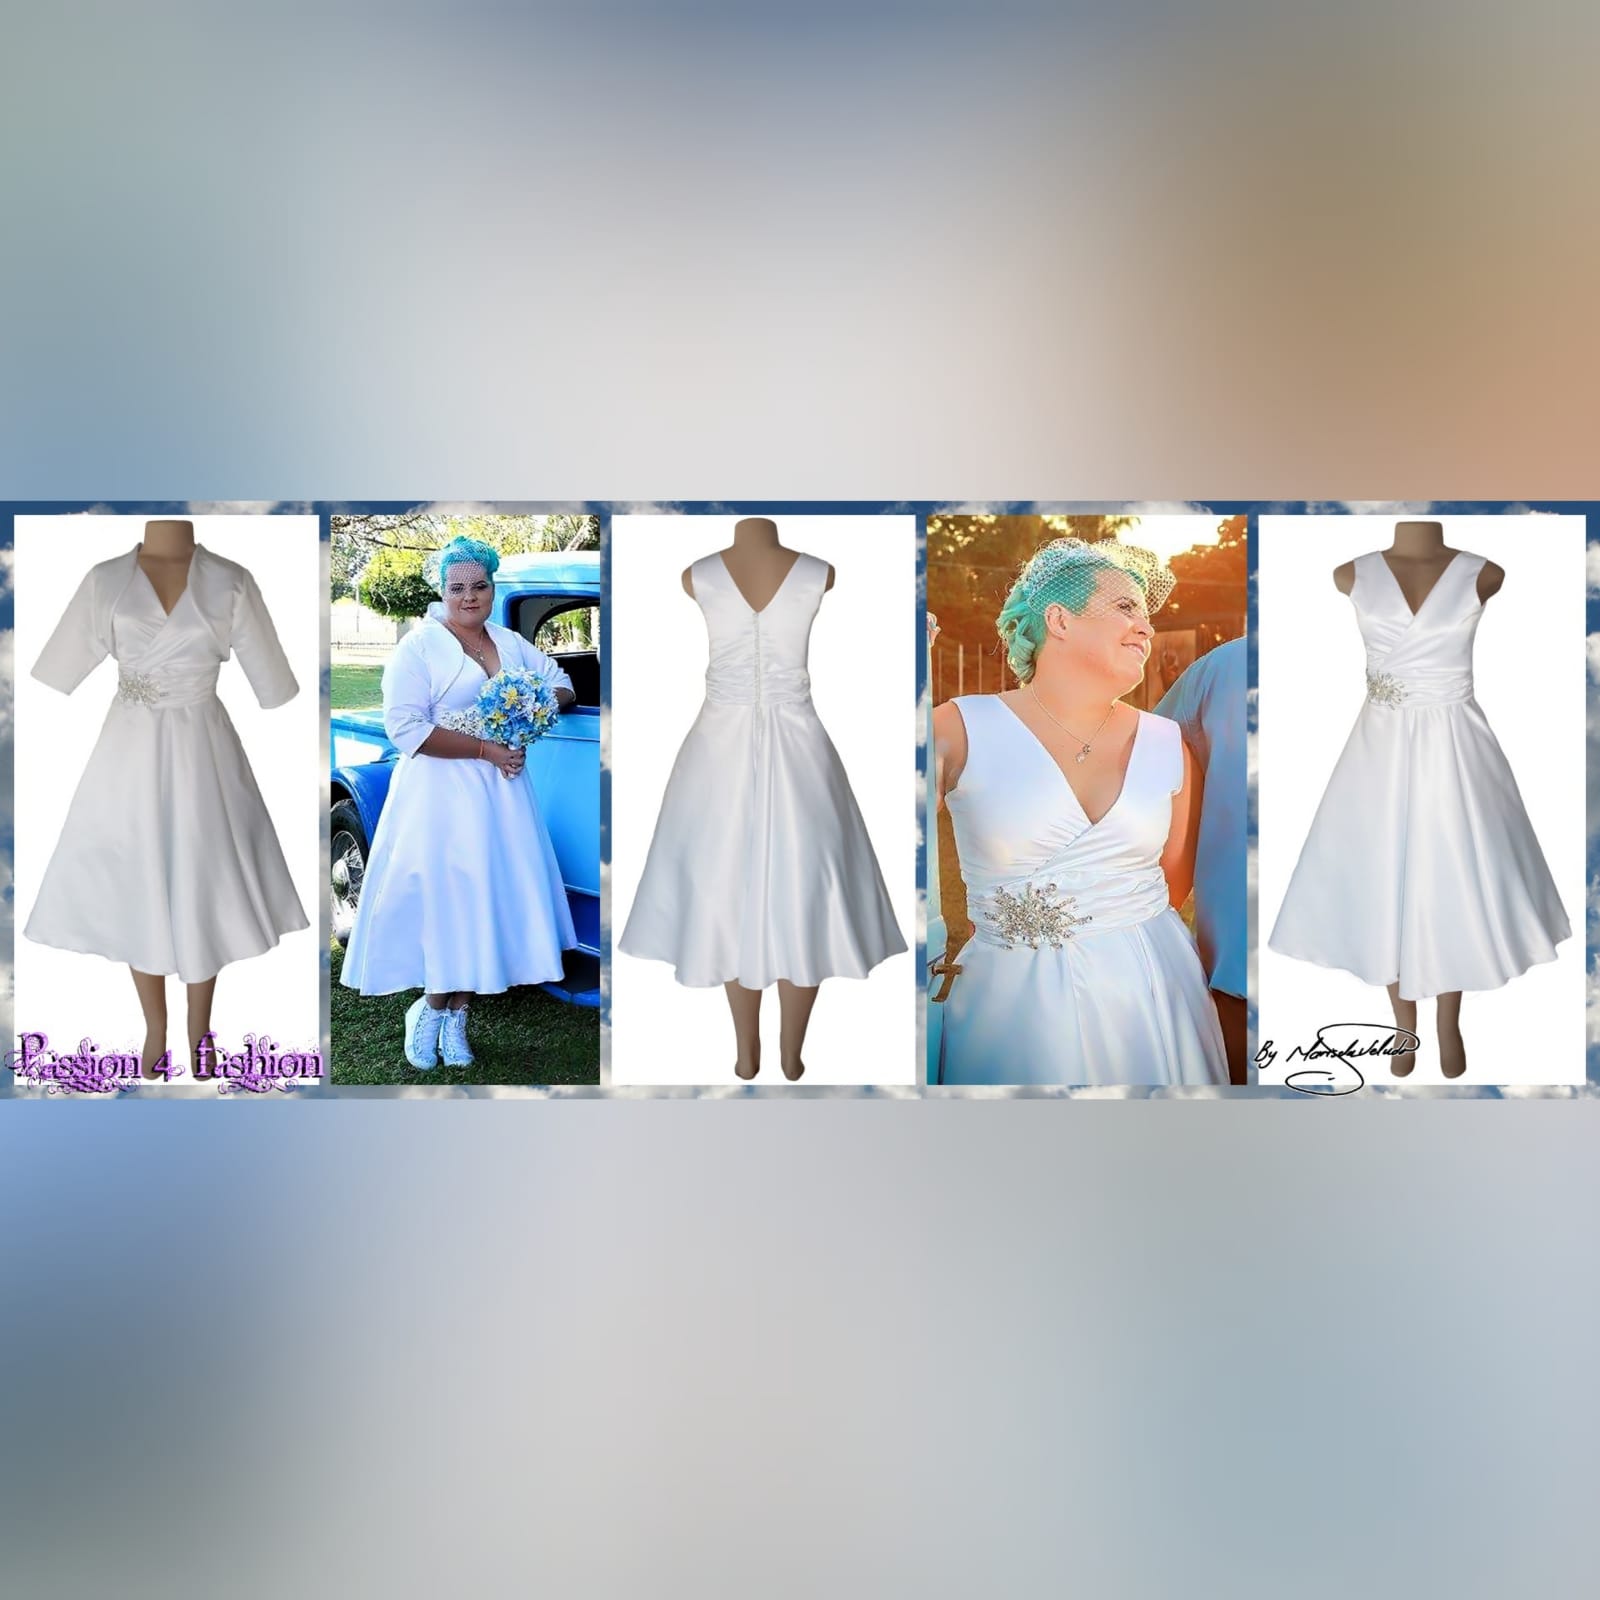 White satin 3/4 length v neck custom made wedding dress 3 white satin 3/4 length v neck custom made wedding dress, with a cross bust effect, with a ruched belt detailed with silver bling. Back detailed with buttons. With a 3/4 sleeve rounded white bolero.